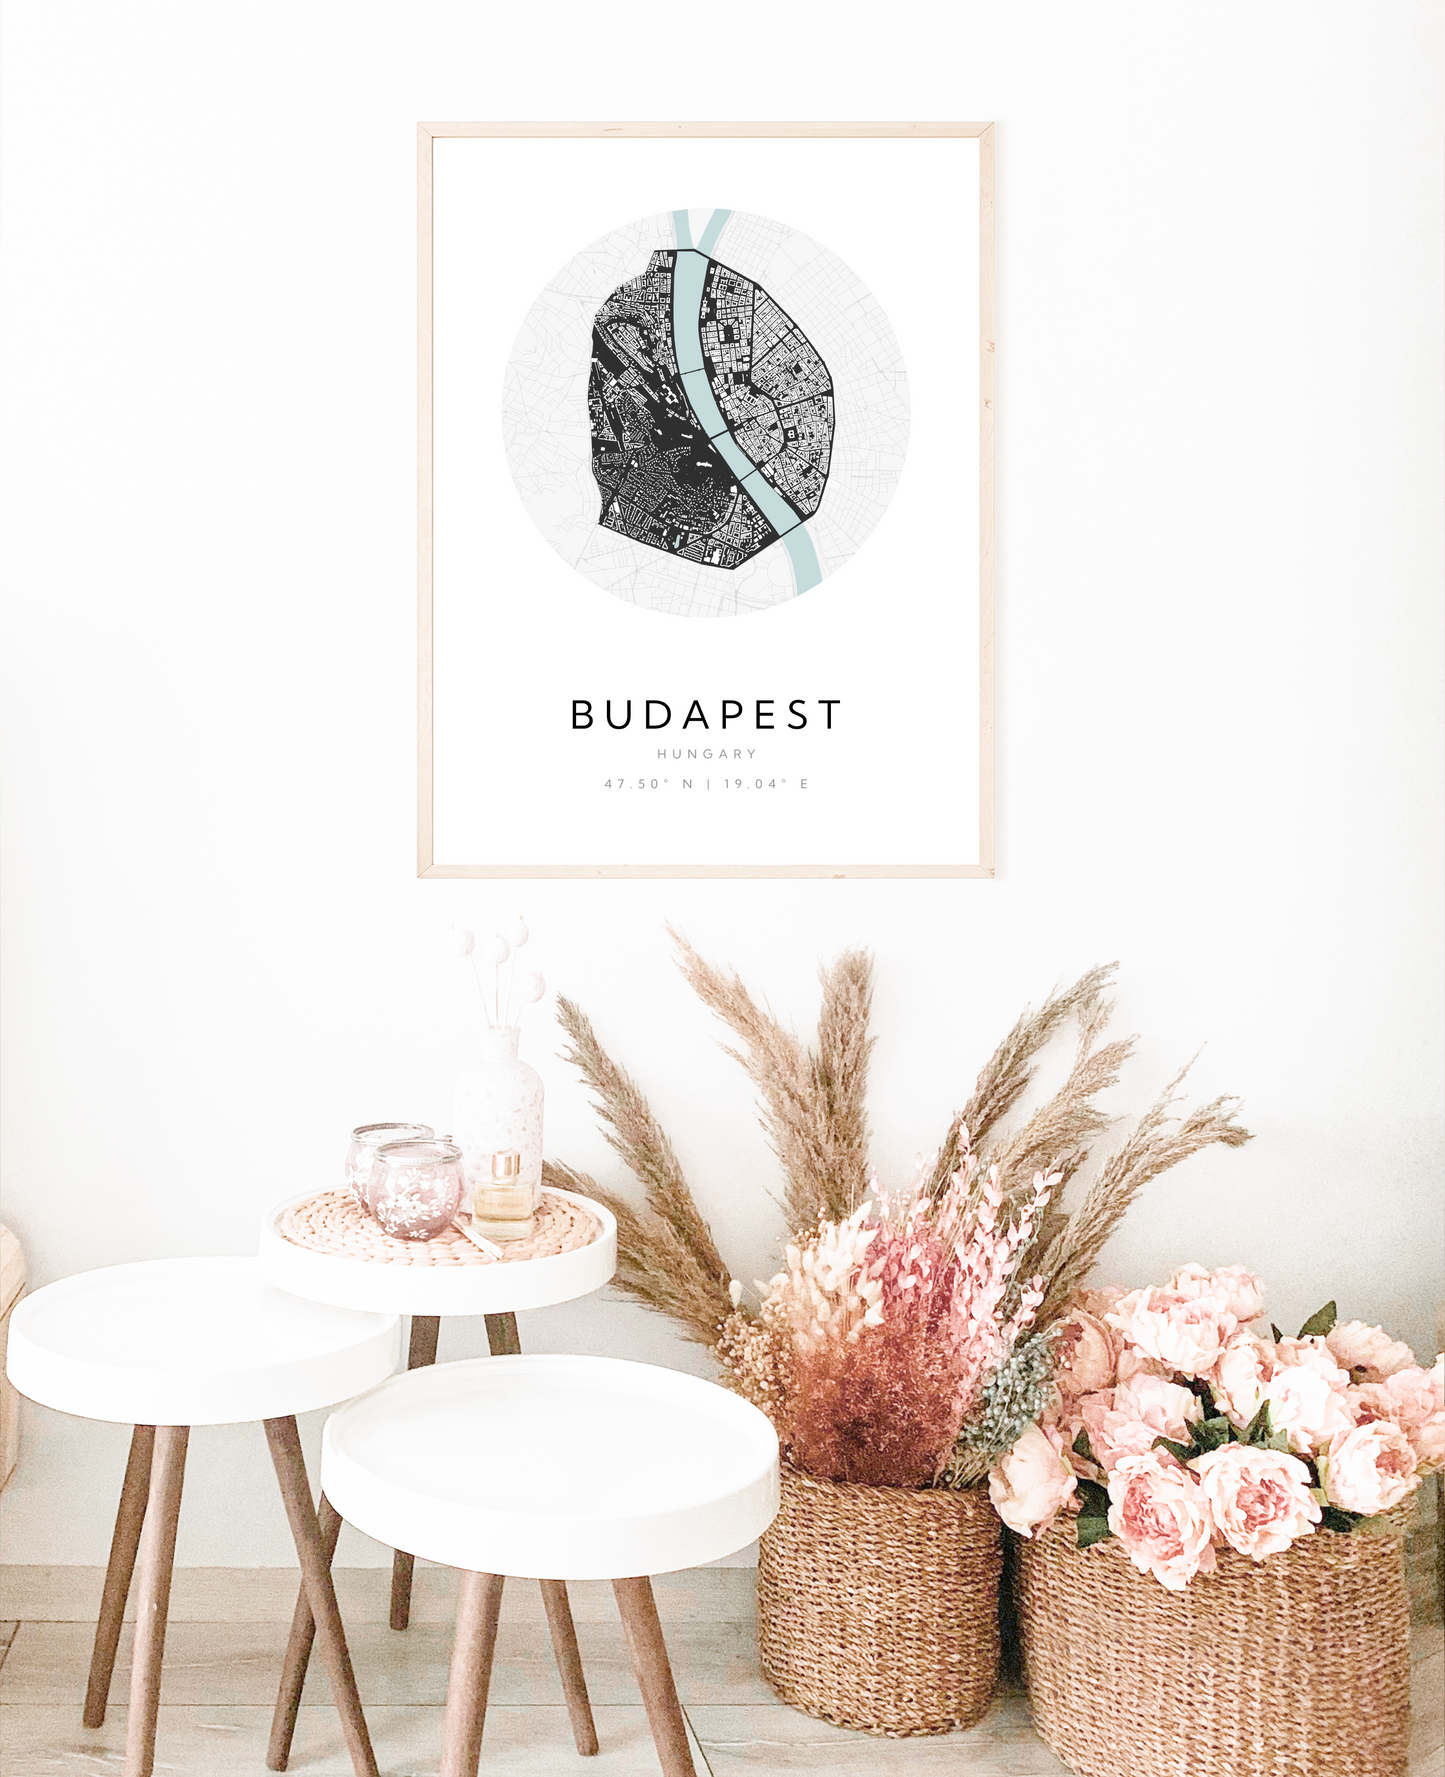 Budapest City Map Poster